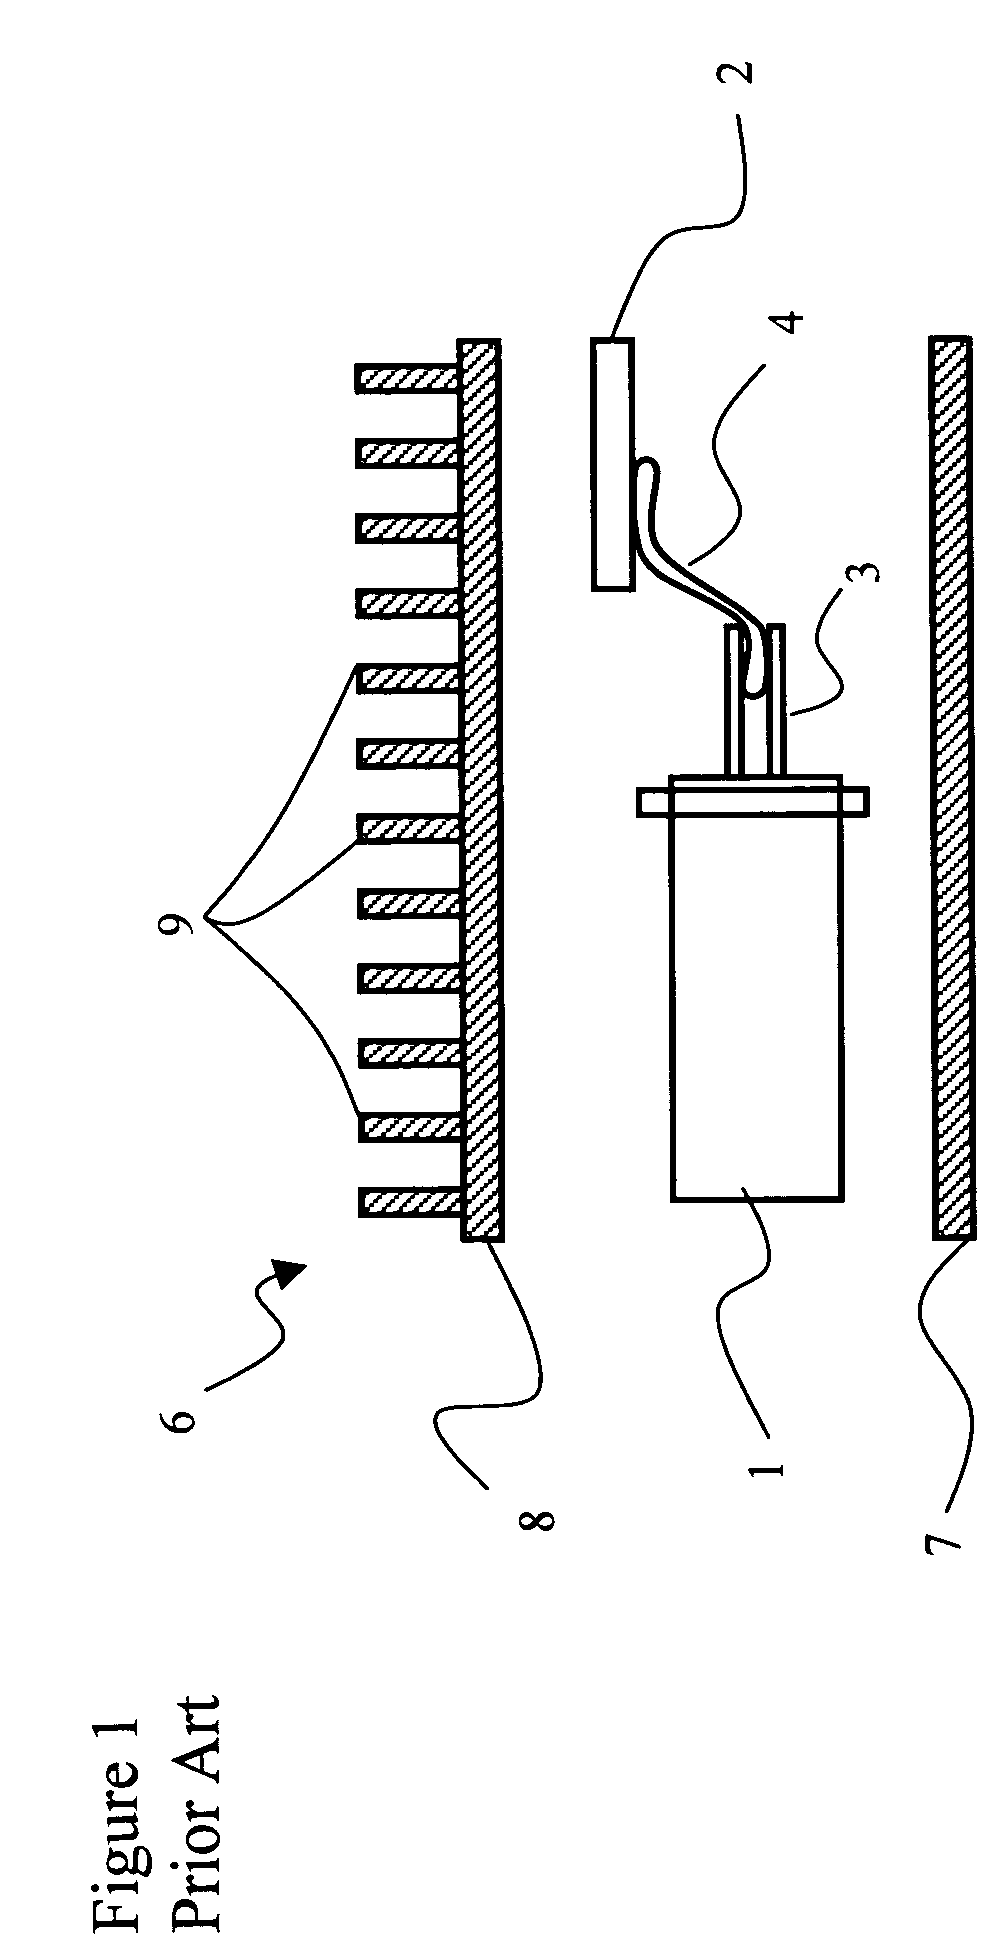 Heat sink tab for optical sub-assembly